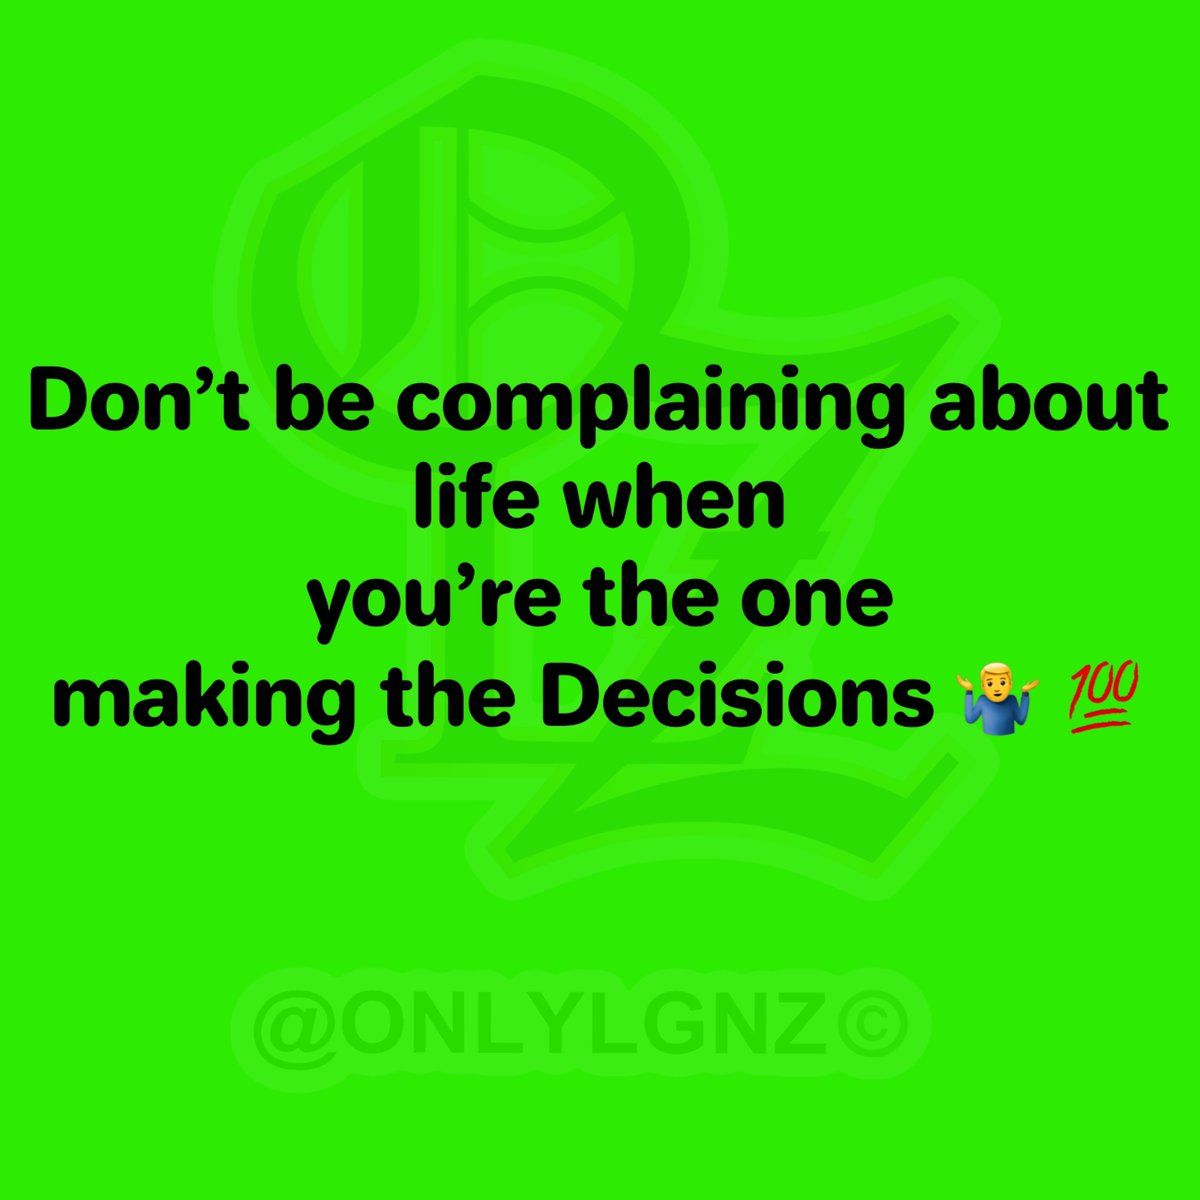 Since you are alive making decisions today, Focus on rearranging your thought process on how you determine and make decisions in life.. 

#OnLyLgnz #MytiBrain™️
[ Change your mind🧠, Change your Life💚]